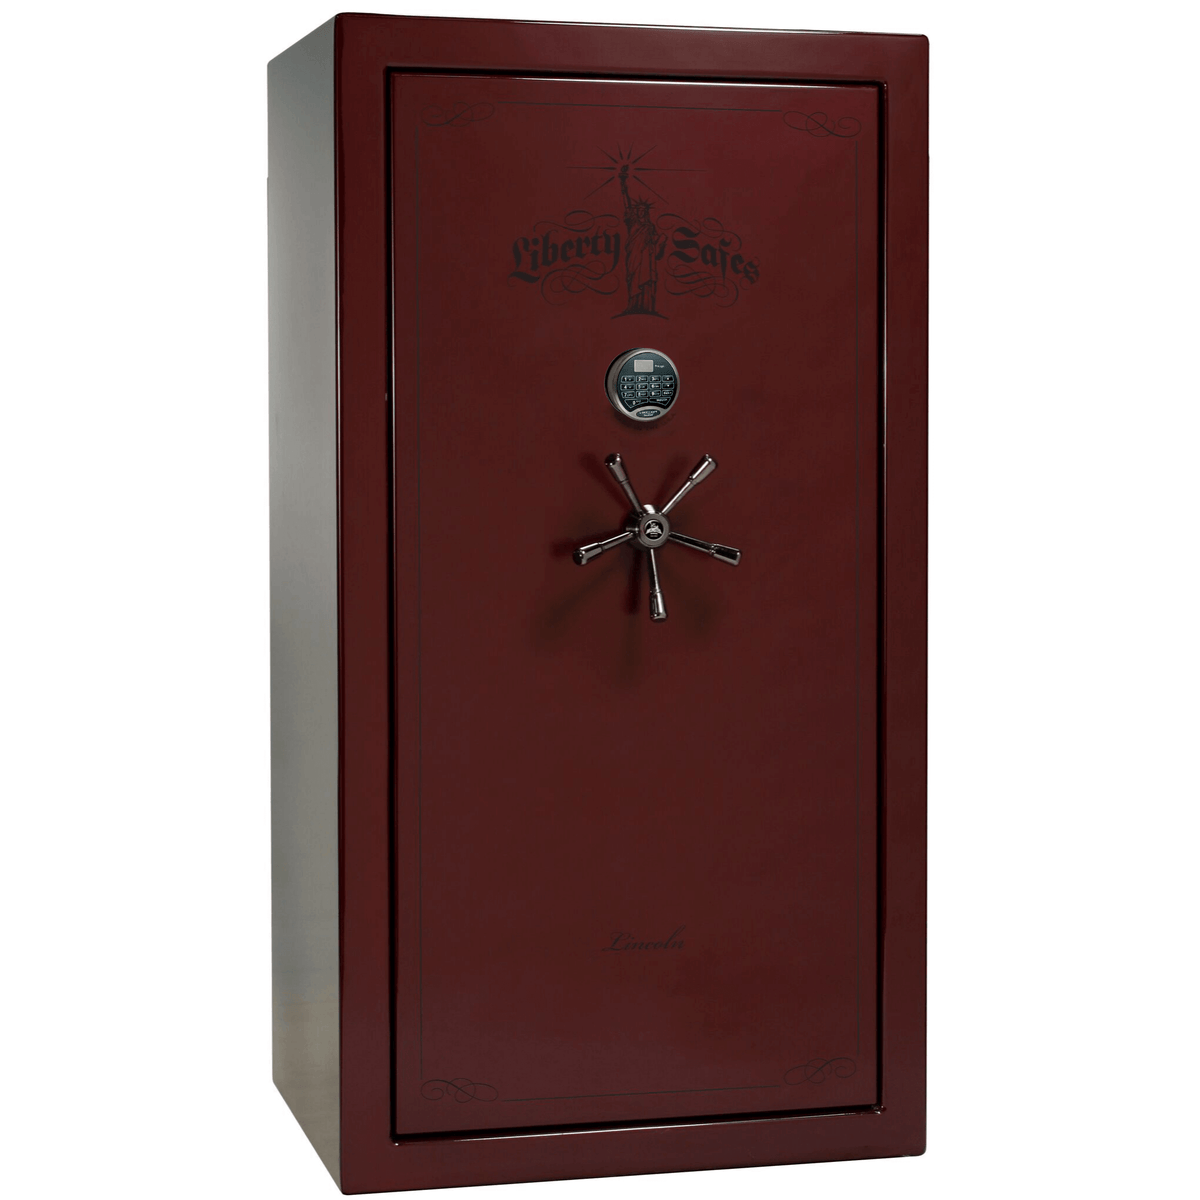 Liberty Lincoln 40 Safe in Burgundy Gloss with Black Chrome Electronic Lock.